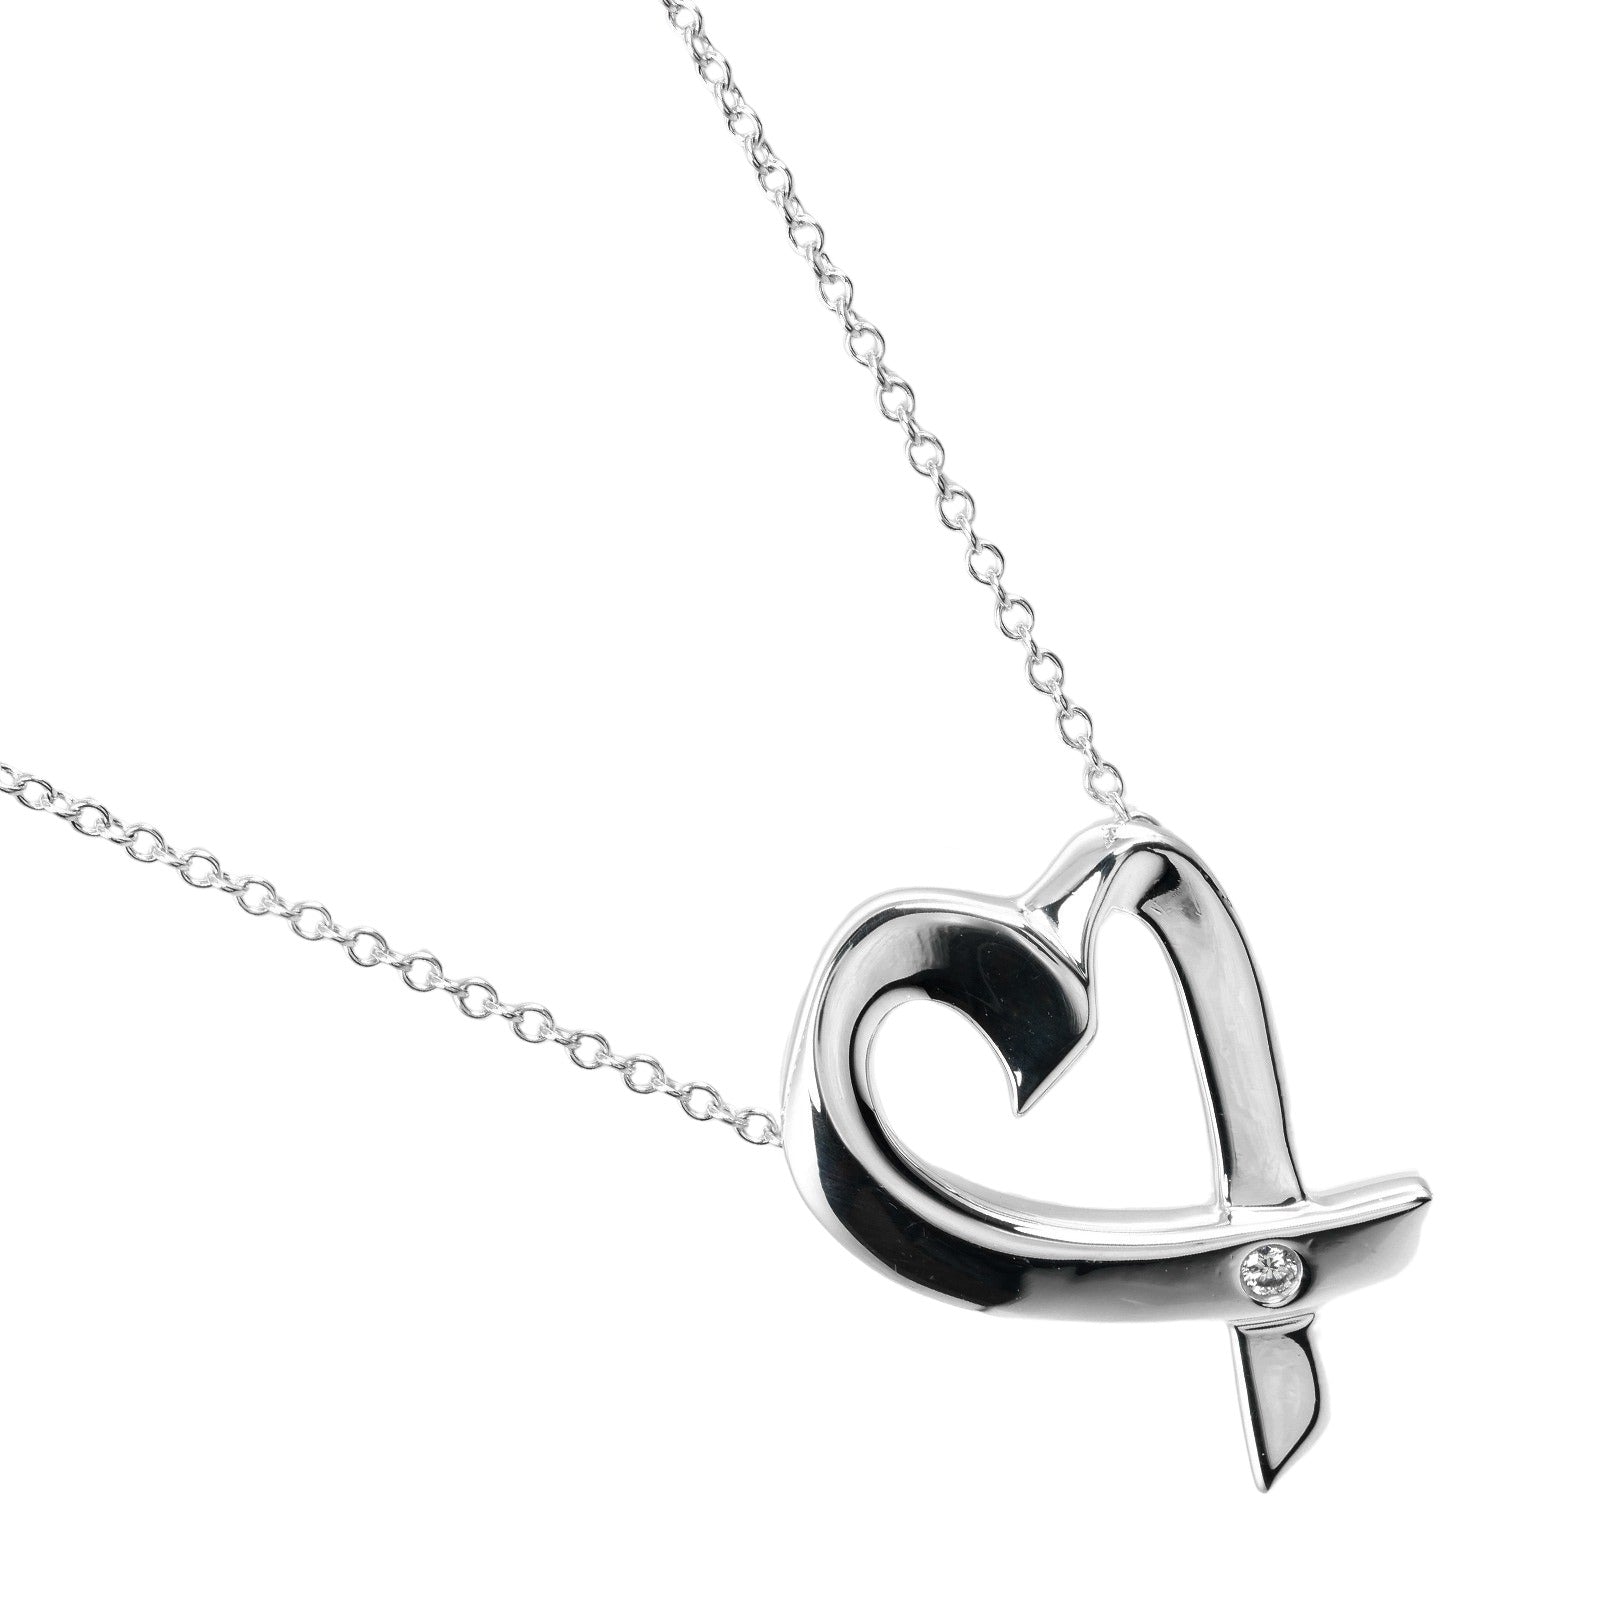 Tiffany & Co Loving Heart Diamond Pendant Necklace Metal Necklace in Excellent condition